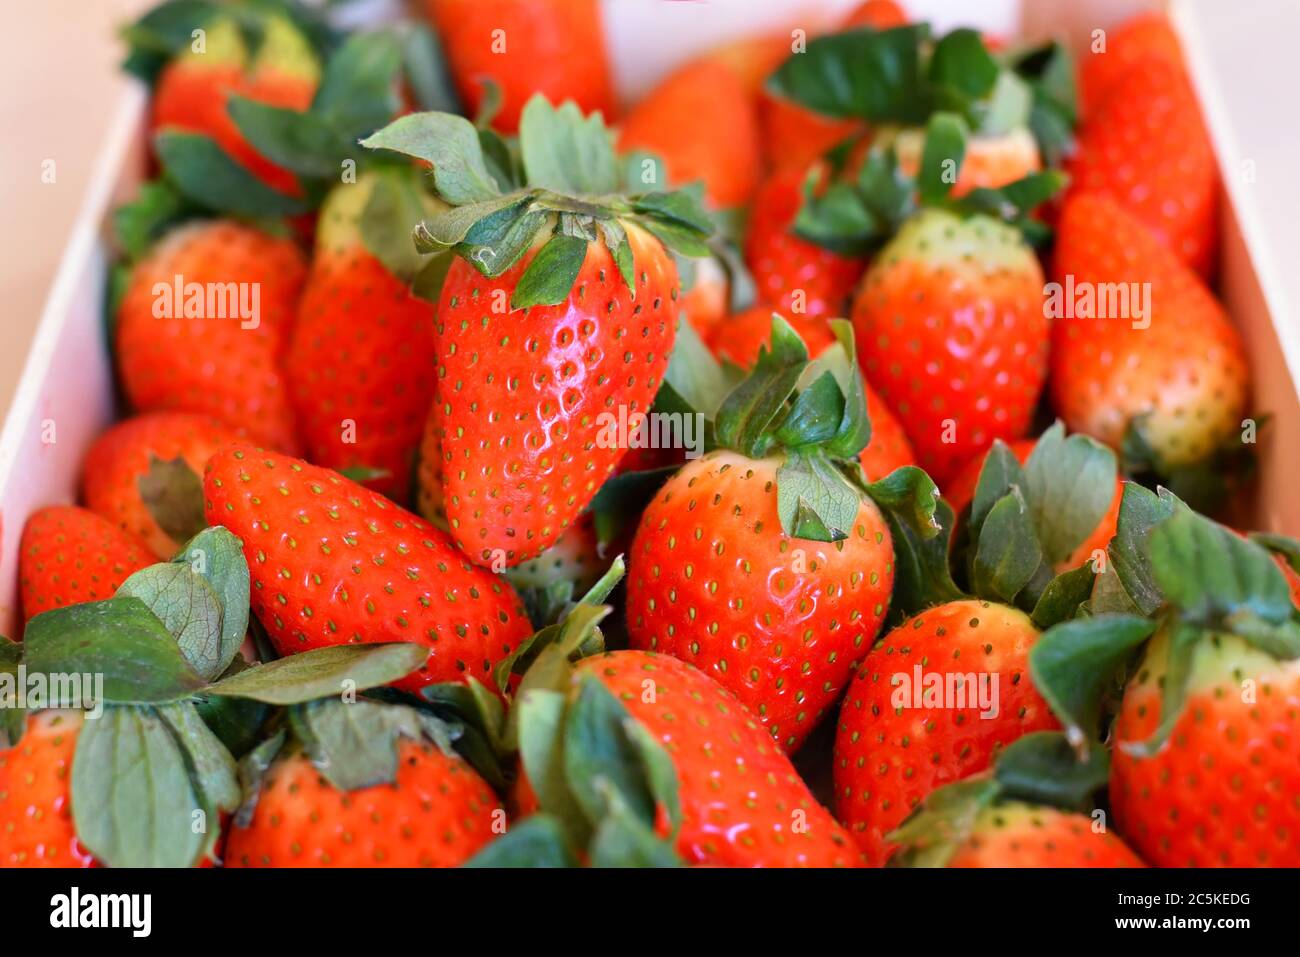 Close-up shot of juicy ripe red strawberries with green leaves. Stock Photo